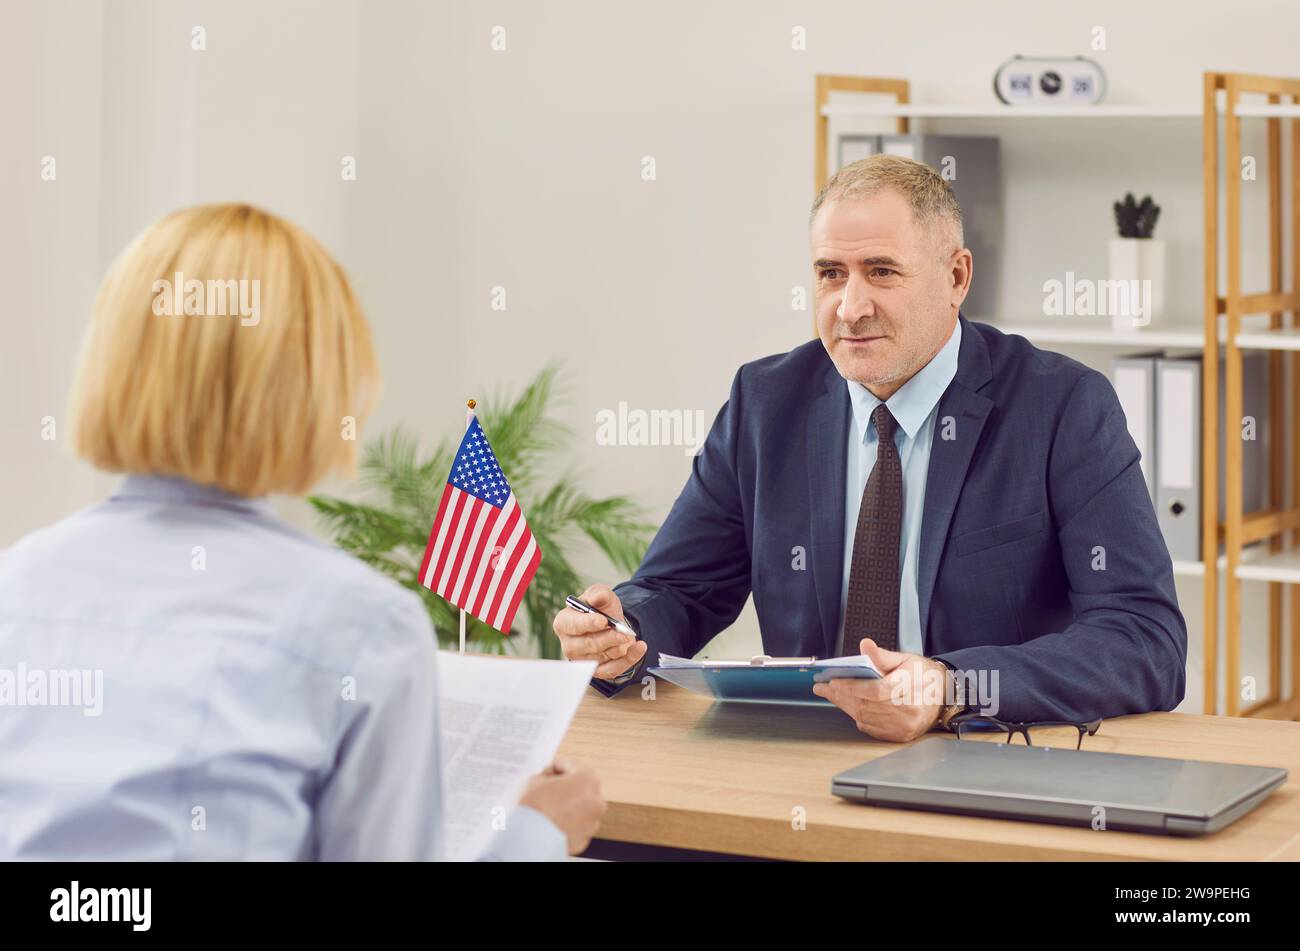 USA Consulate or Immigration Services worker talking to woman about visa or immigration Stock Photo